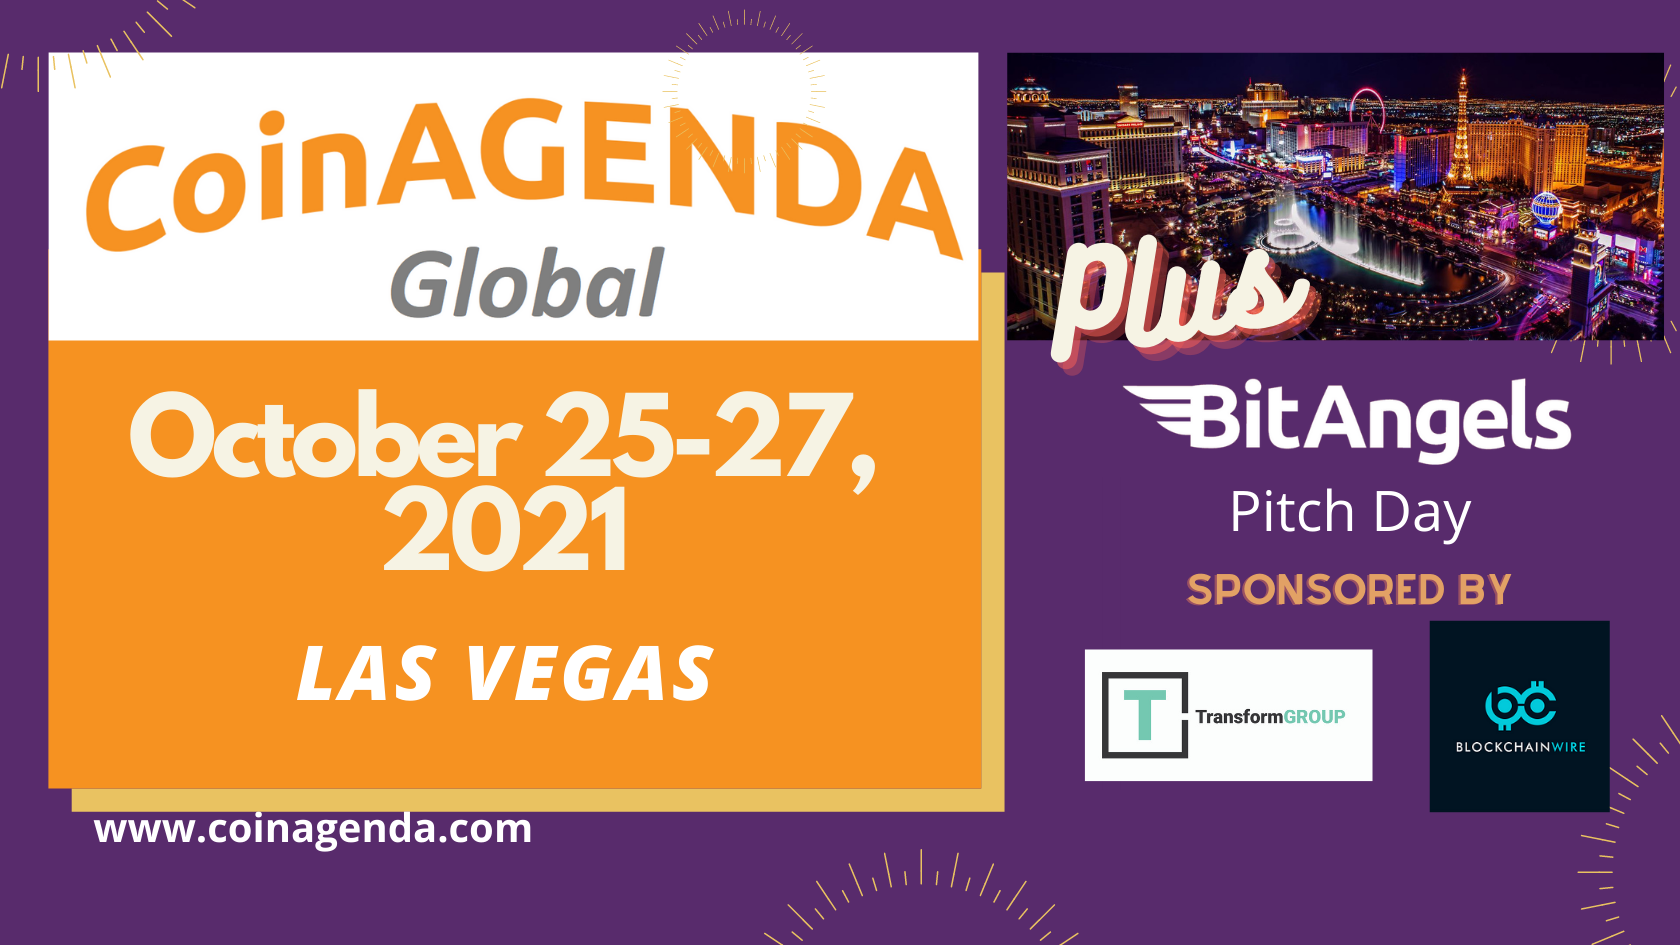 CoinAgenda Global Gathers Blockchain Leaders for Oct 25-27 Las Vegas Event